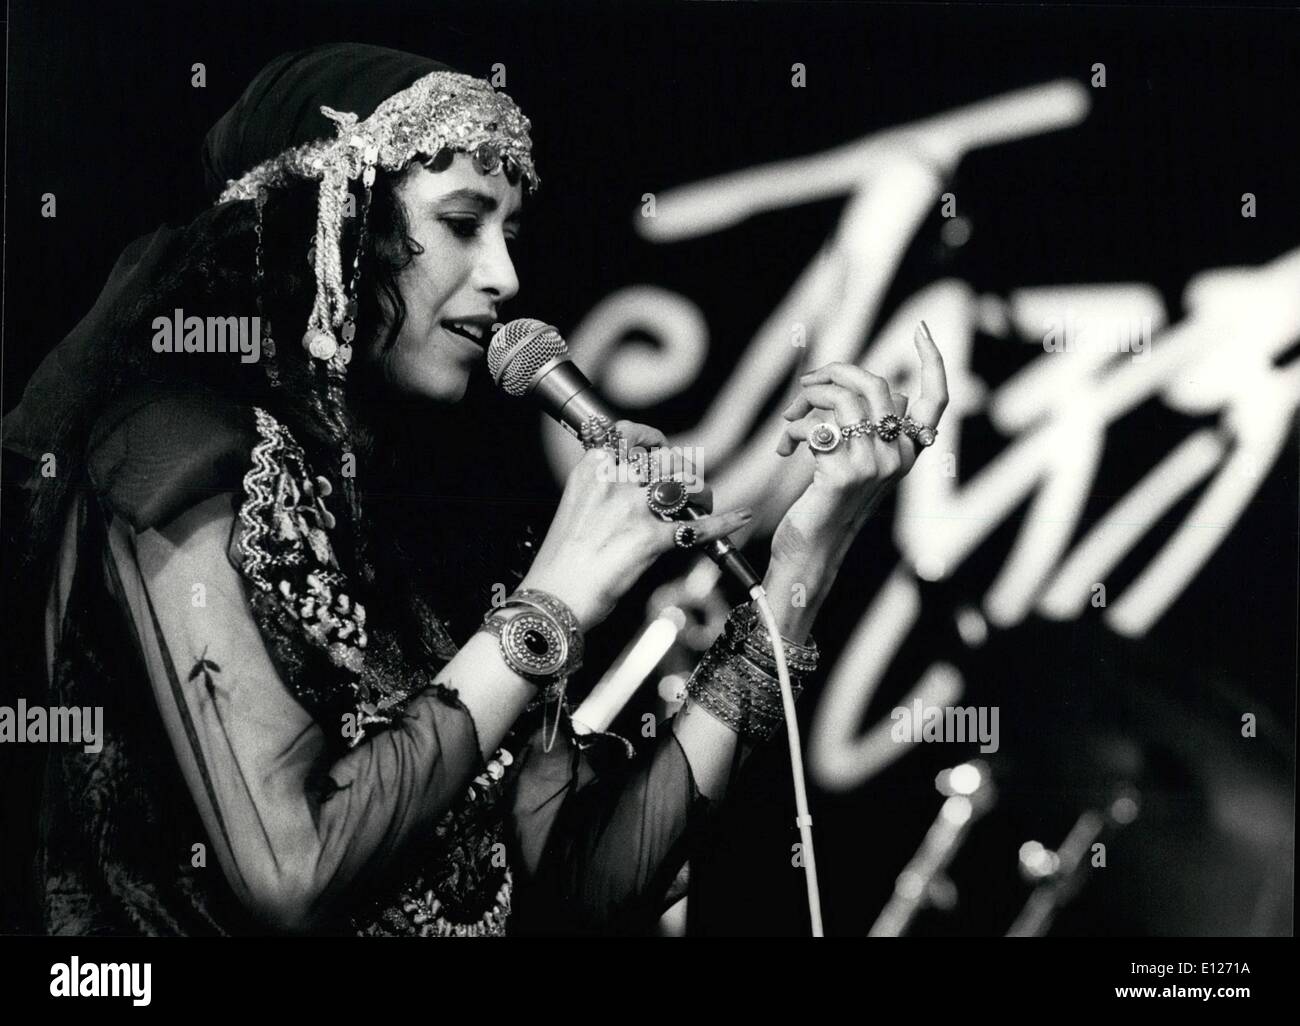 Jul. 07, 1990 - Ladies Night in Montreaux. Israelian Singer Ofra Haza enchanted the visitors of the Jazz Festival in Montreaux last Friday night with her oriental pop sound. Keystone Press Zuerich 15/07/90. Stock Photo